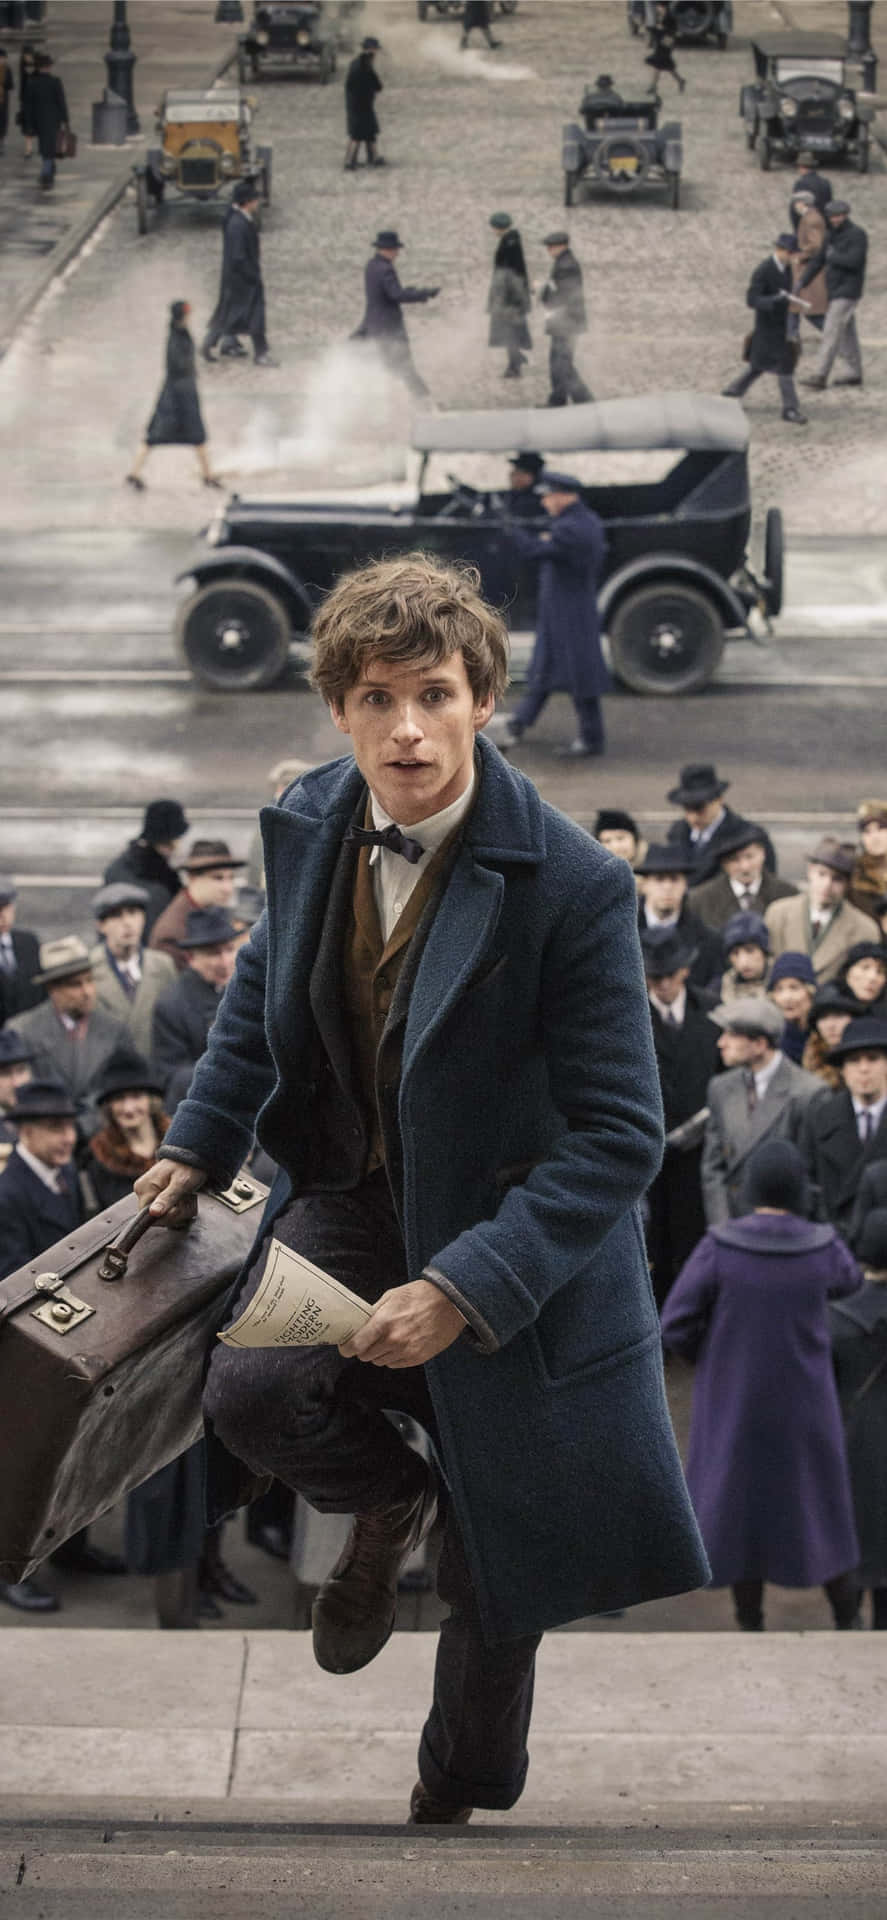 Newt Scamander and his Fantastic Beasts in an adventure Wallpaper